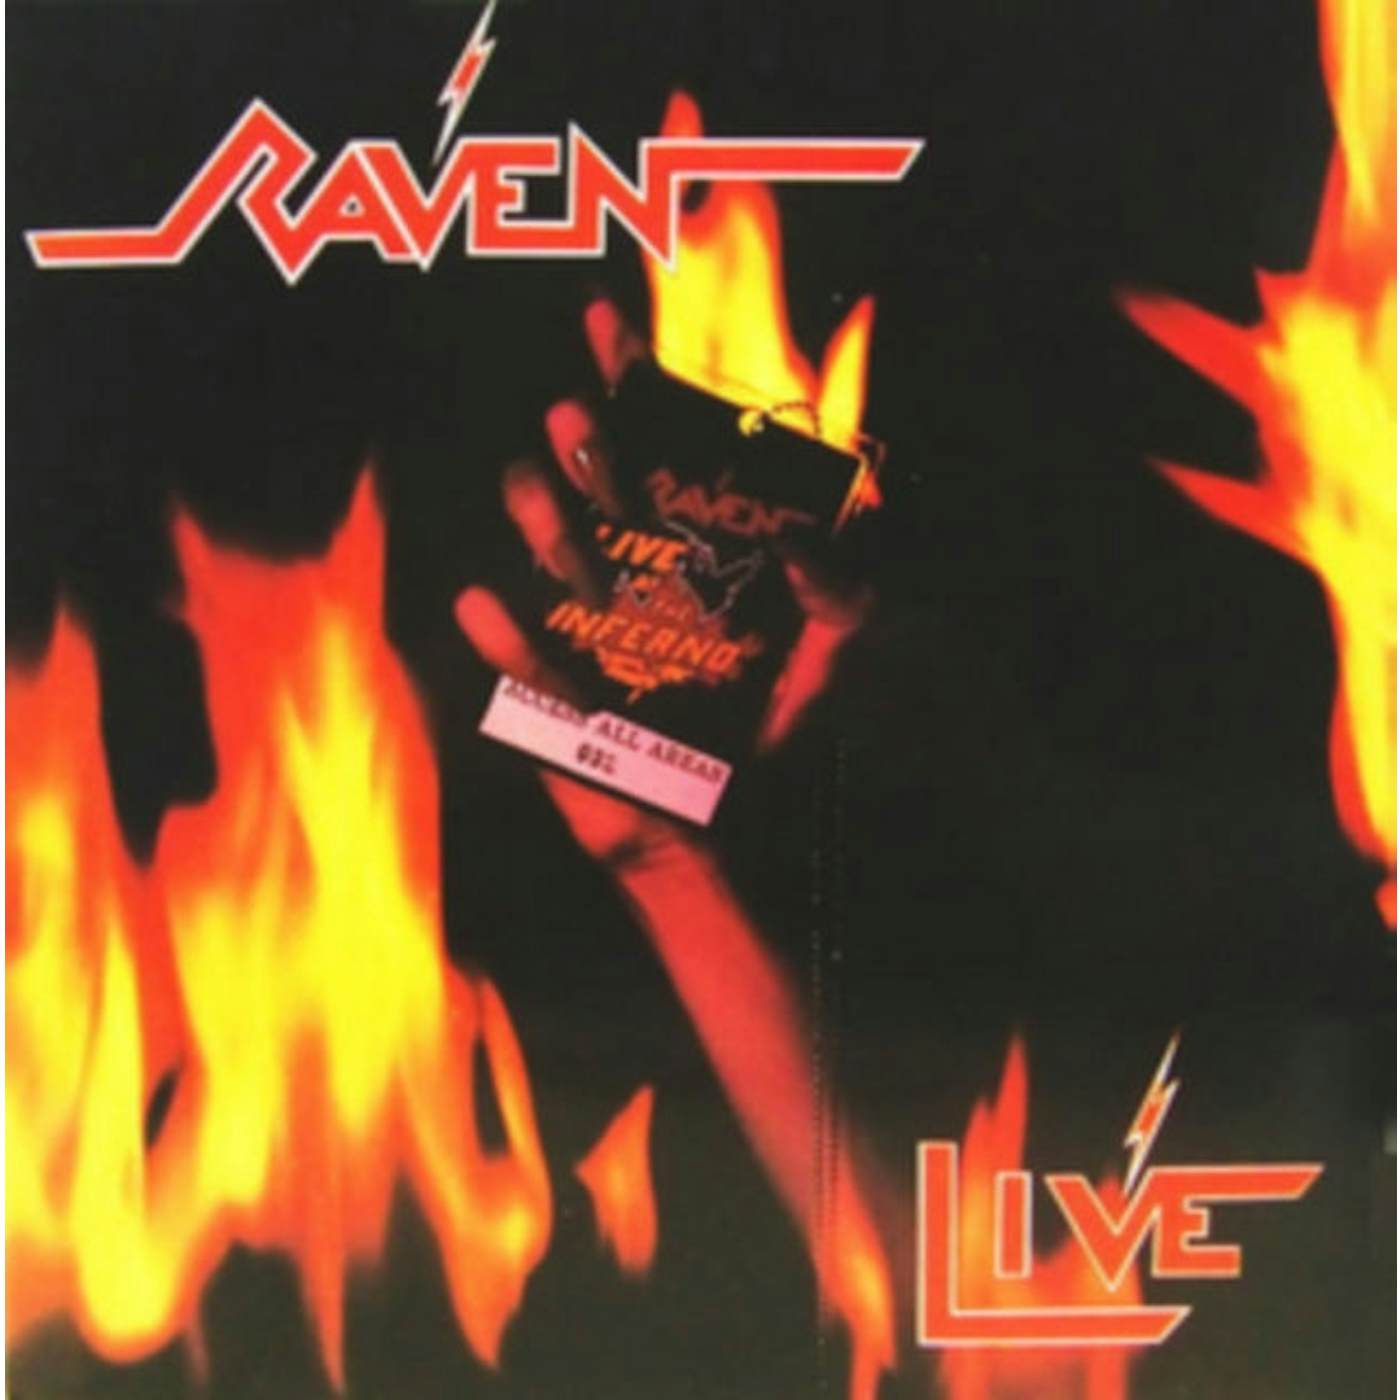 Raven CD - Live At The Inferno